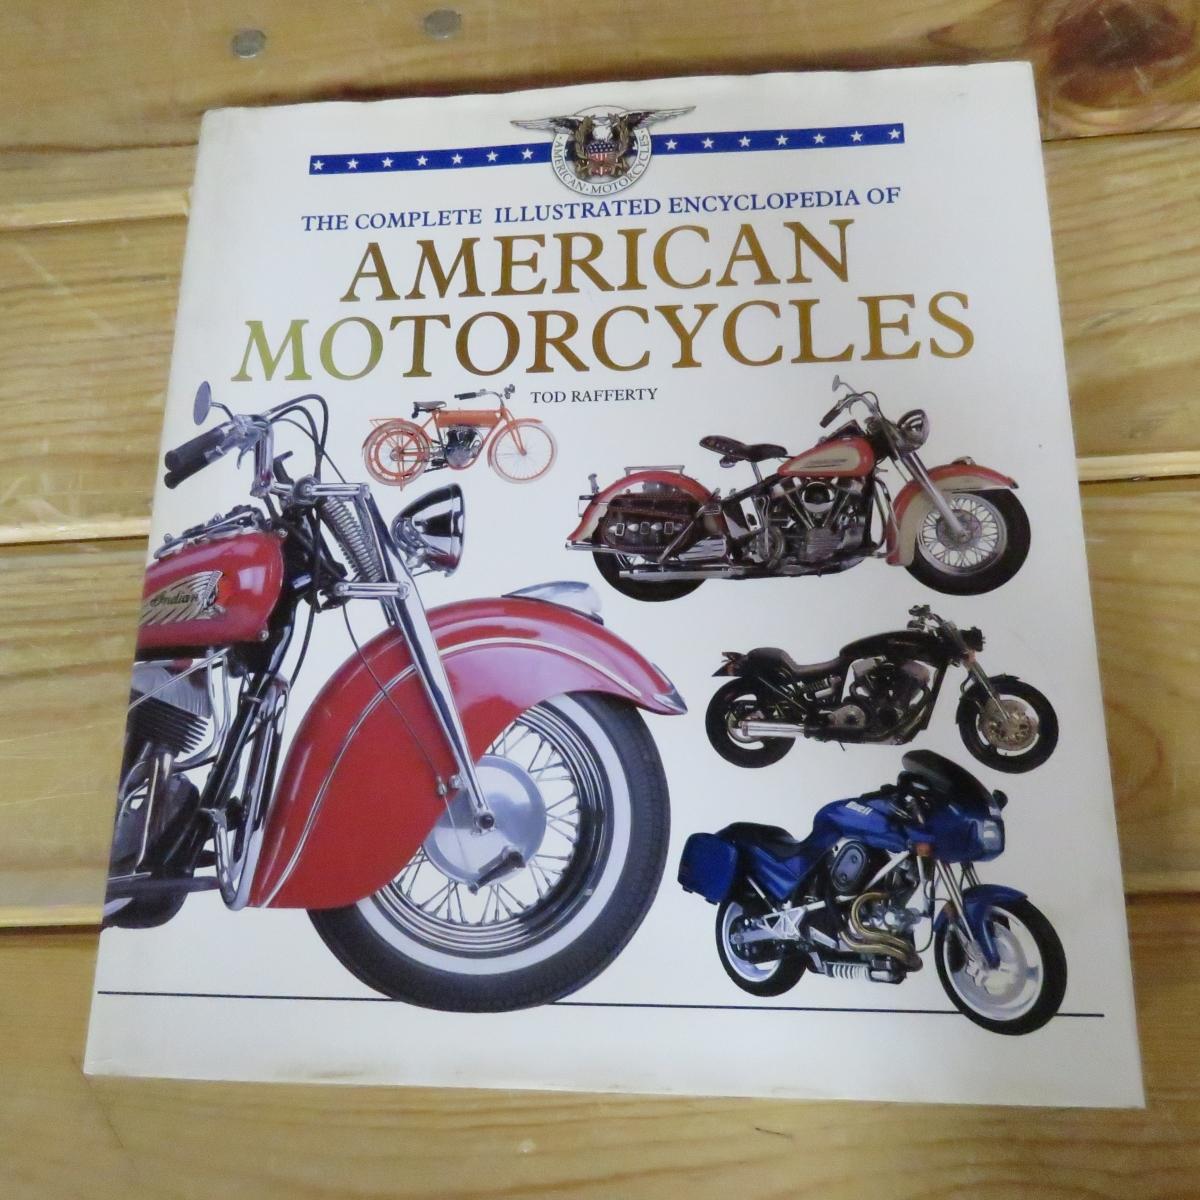 Canadian Mist Sign, Motorcycle & Cadillac Books